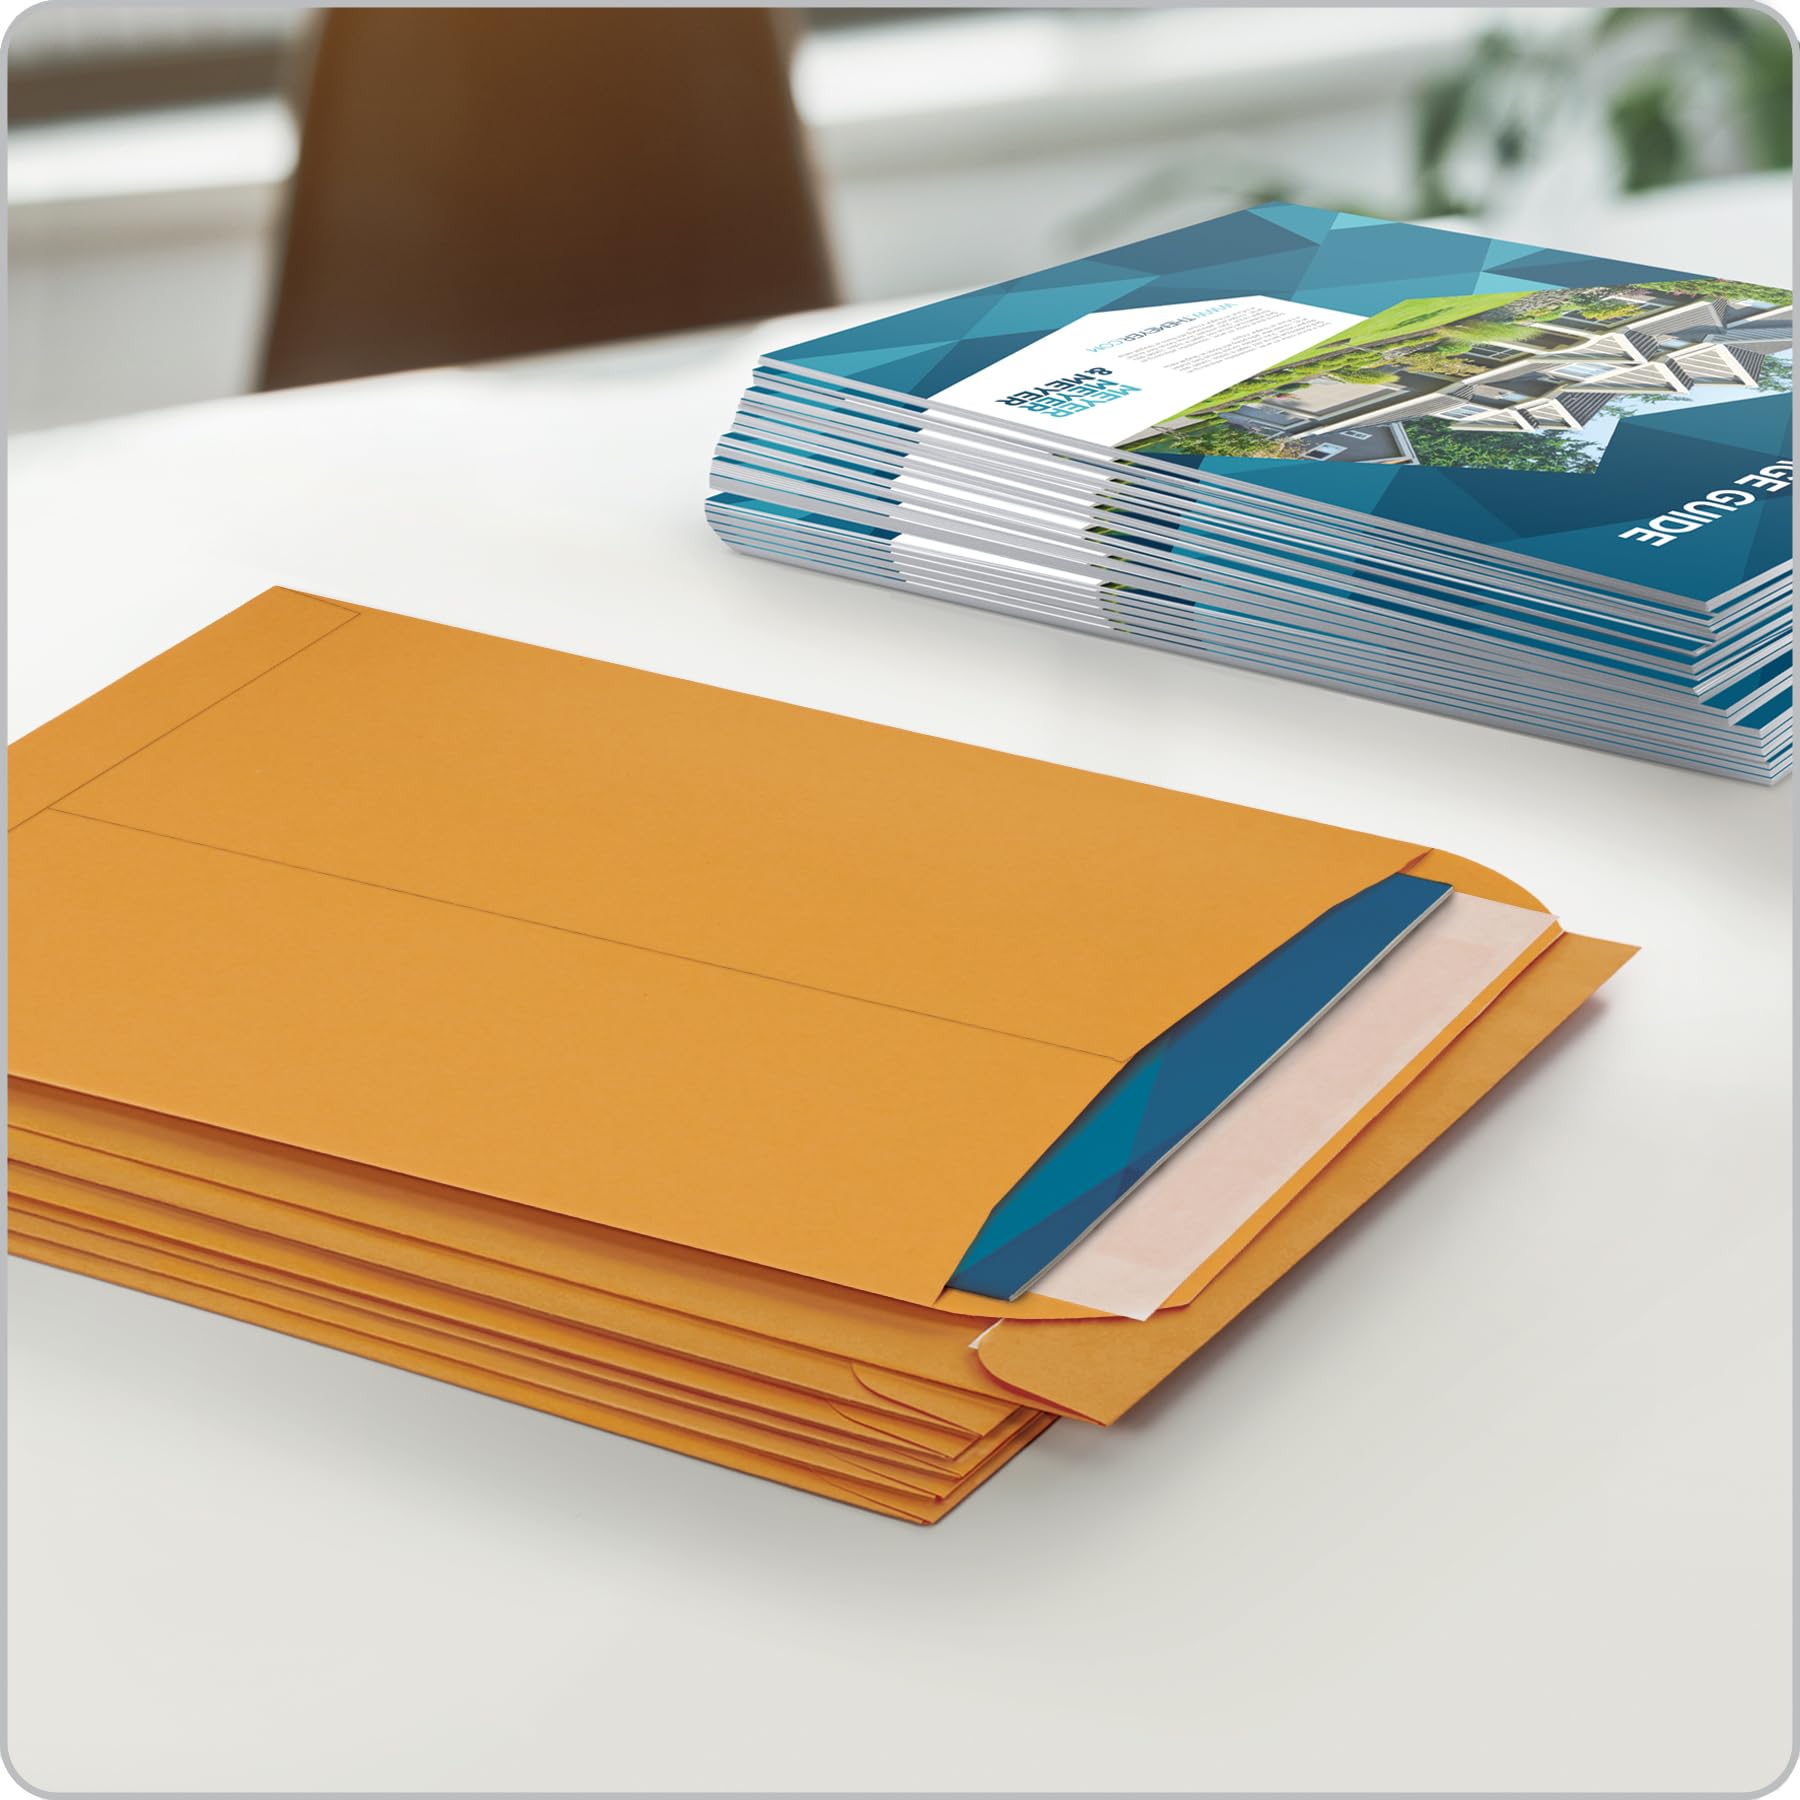 Columbian 9 x 12 Catalog Envelopes with Self Seal Closure, 28 lb Brown Kraft, for Mailing Flat Letter Size Documents or Photos, 30 Per Pack (COLO401)